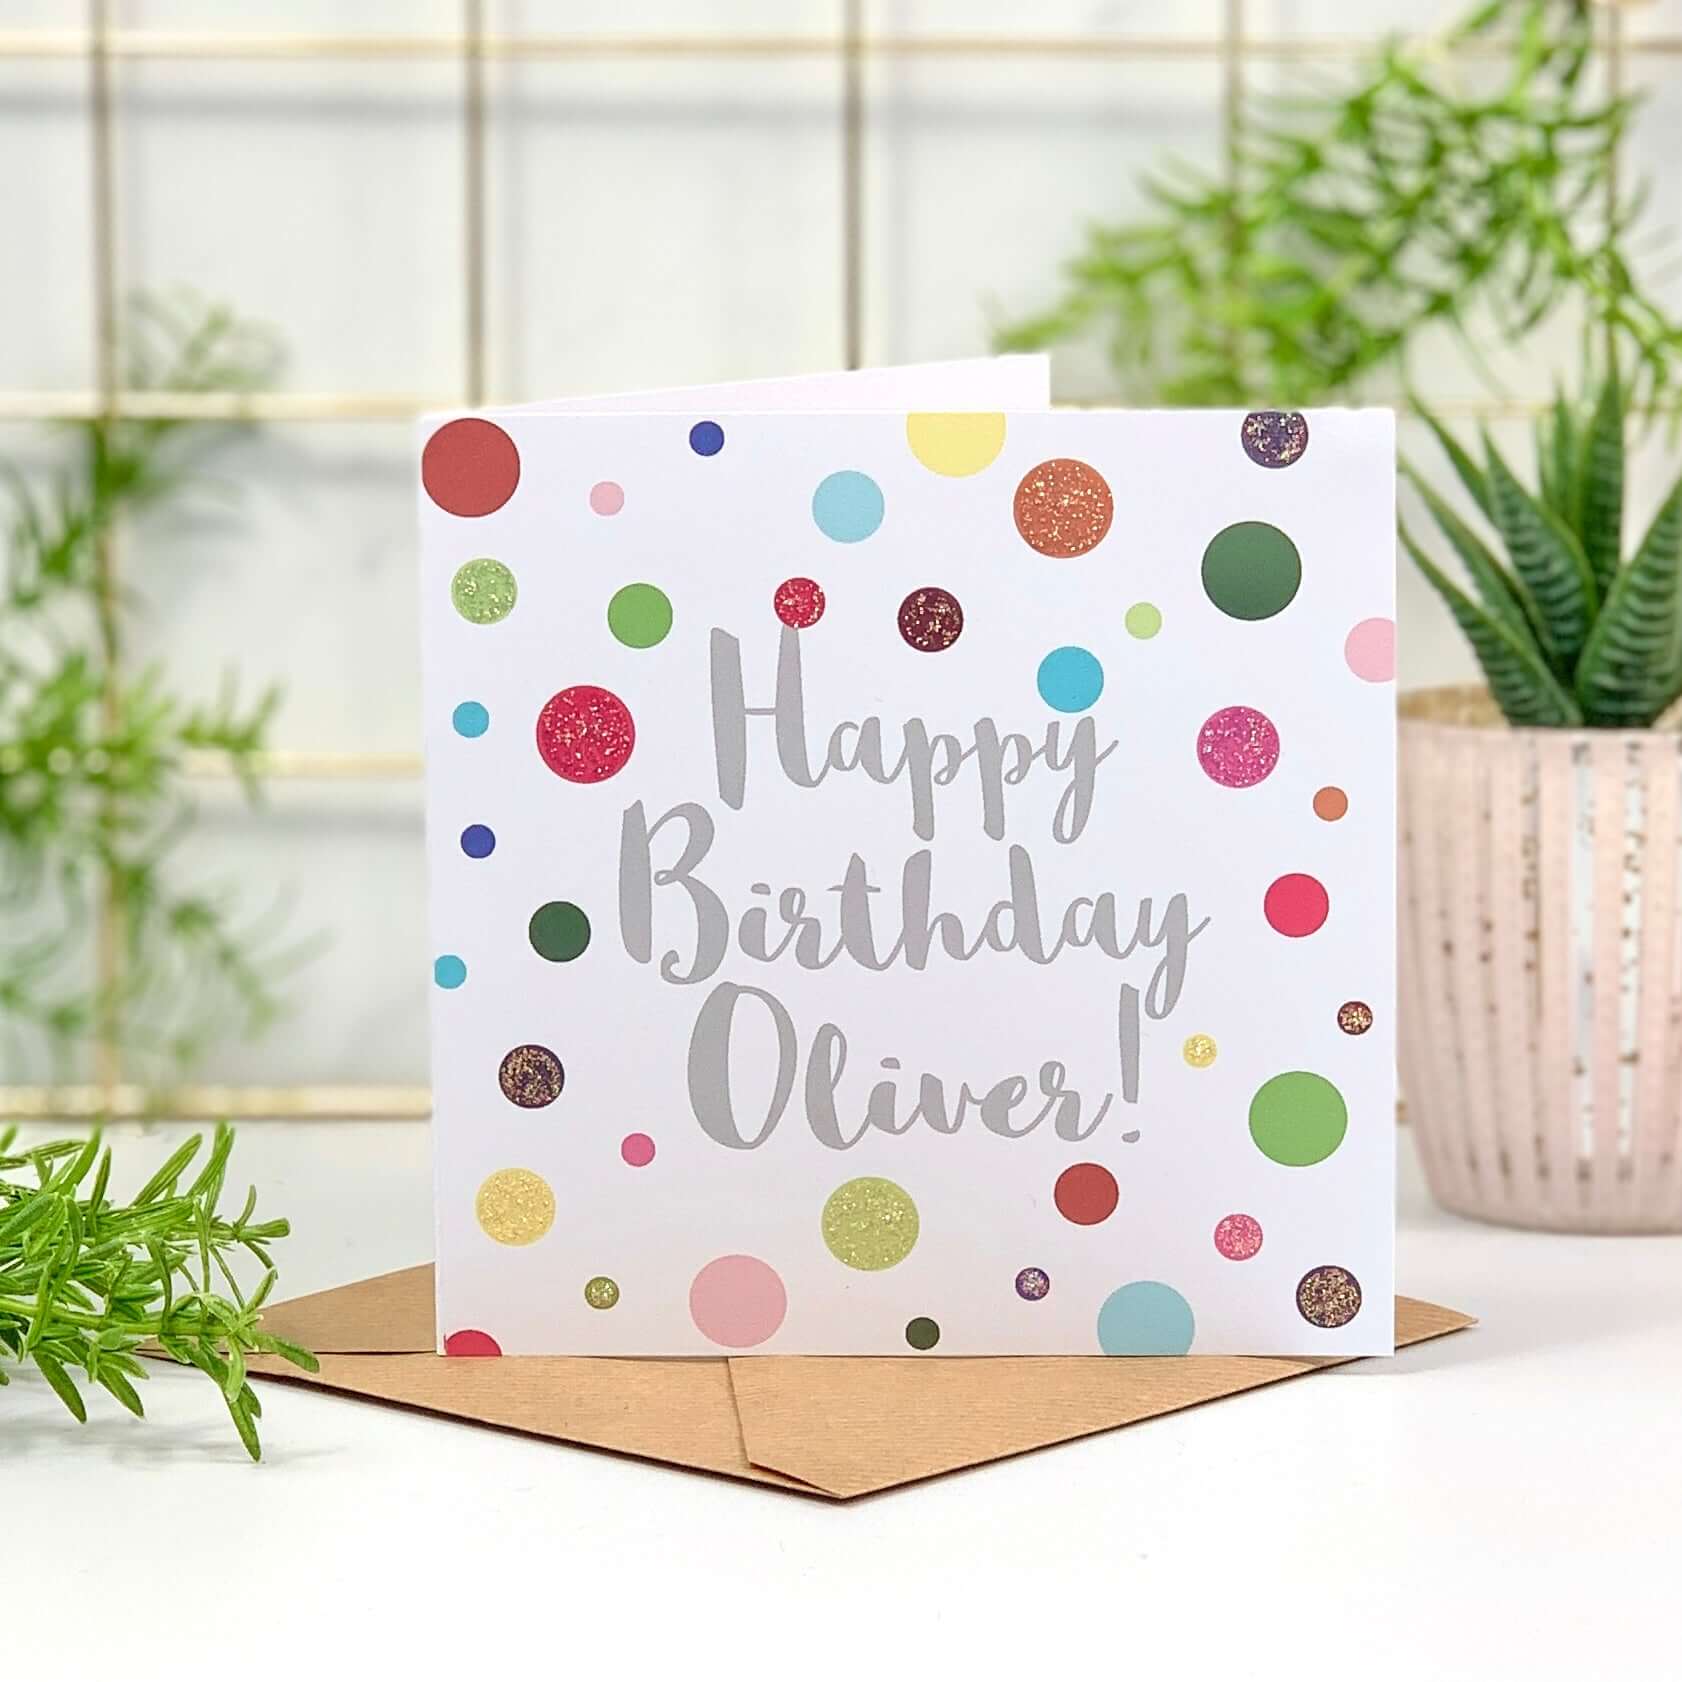 Happy Birthday Glitter Card with Colourful Spots